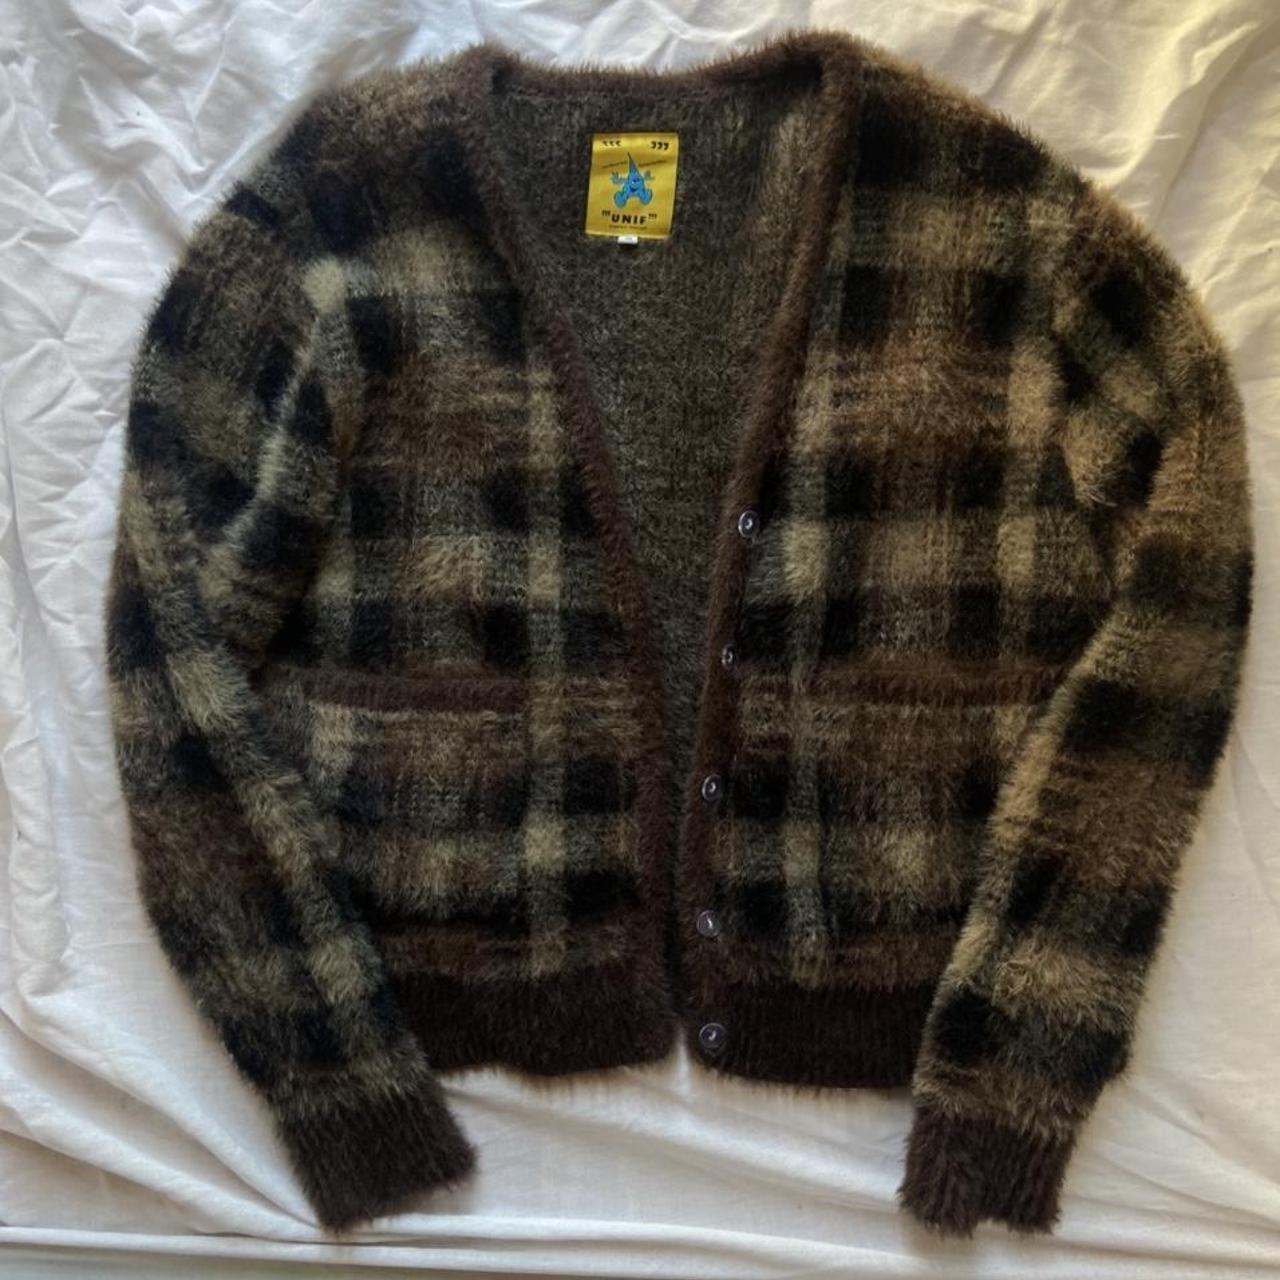 unif ty cardigan in brown plaid ???? great condition - Depop